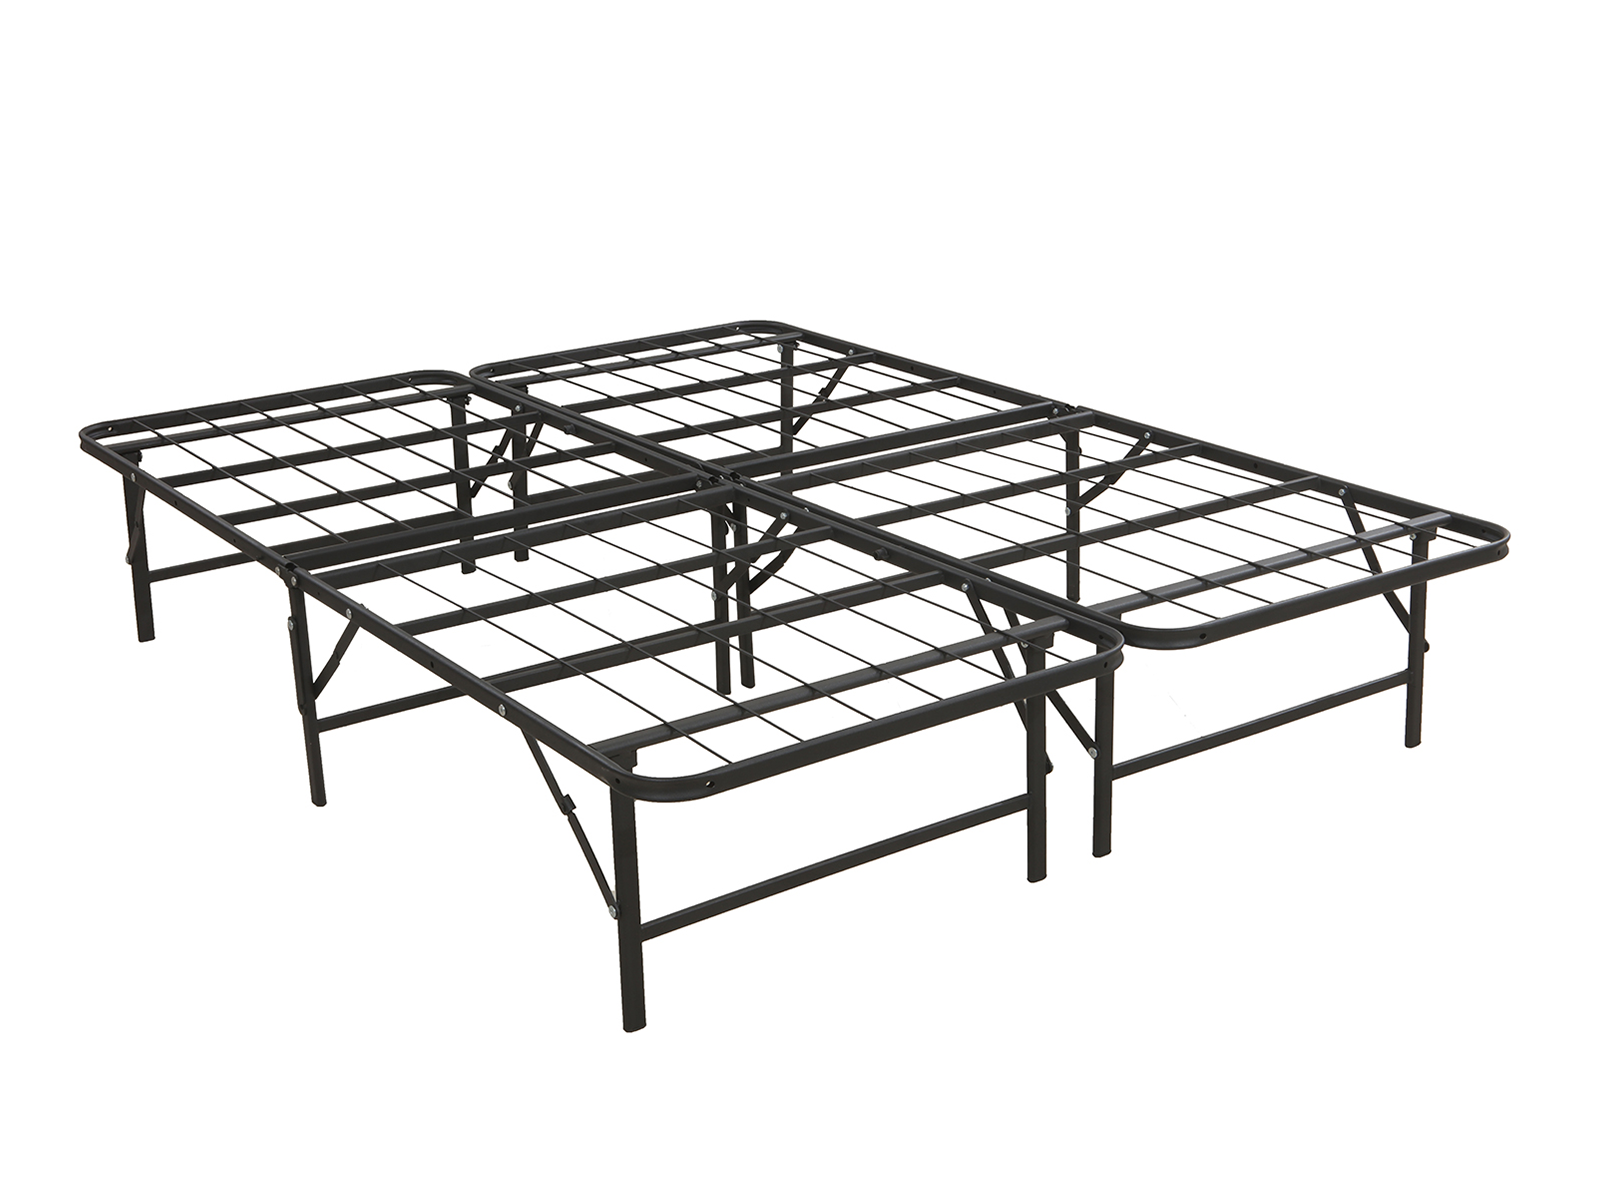 Mattress Firm Platform Bed Frame | Queen | Deluxe Raised Metal | Easy Assembly